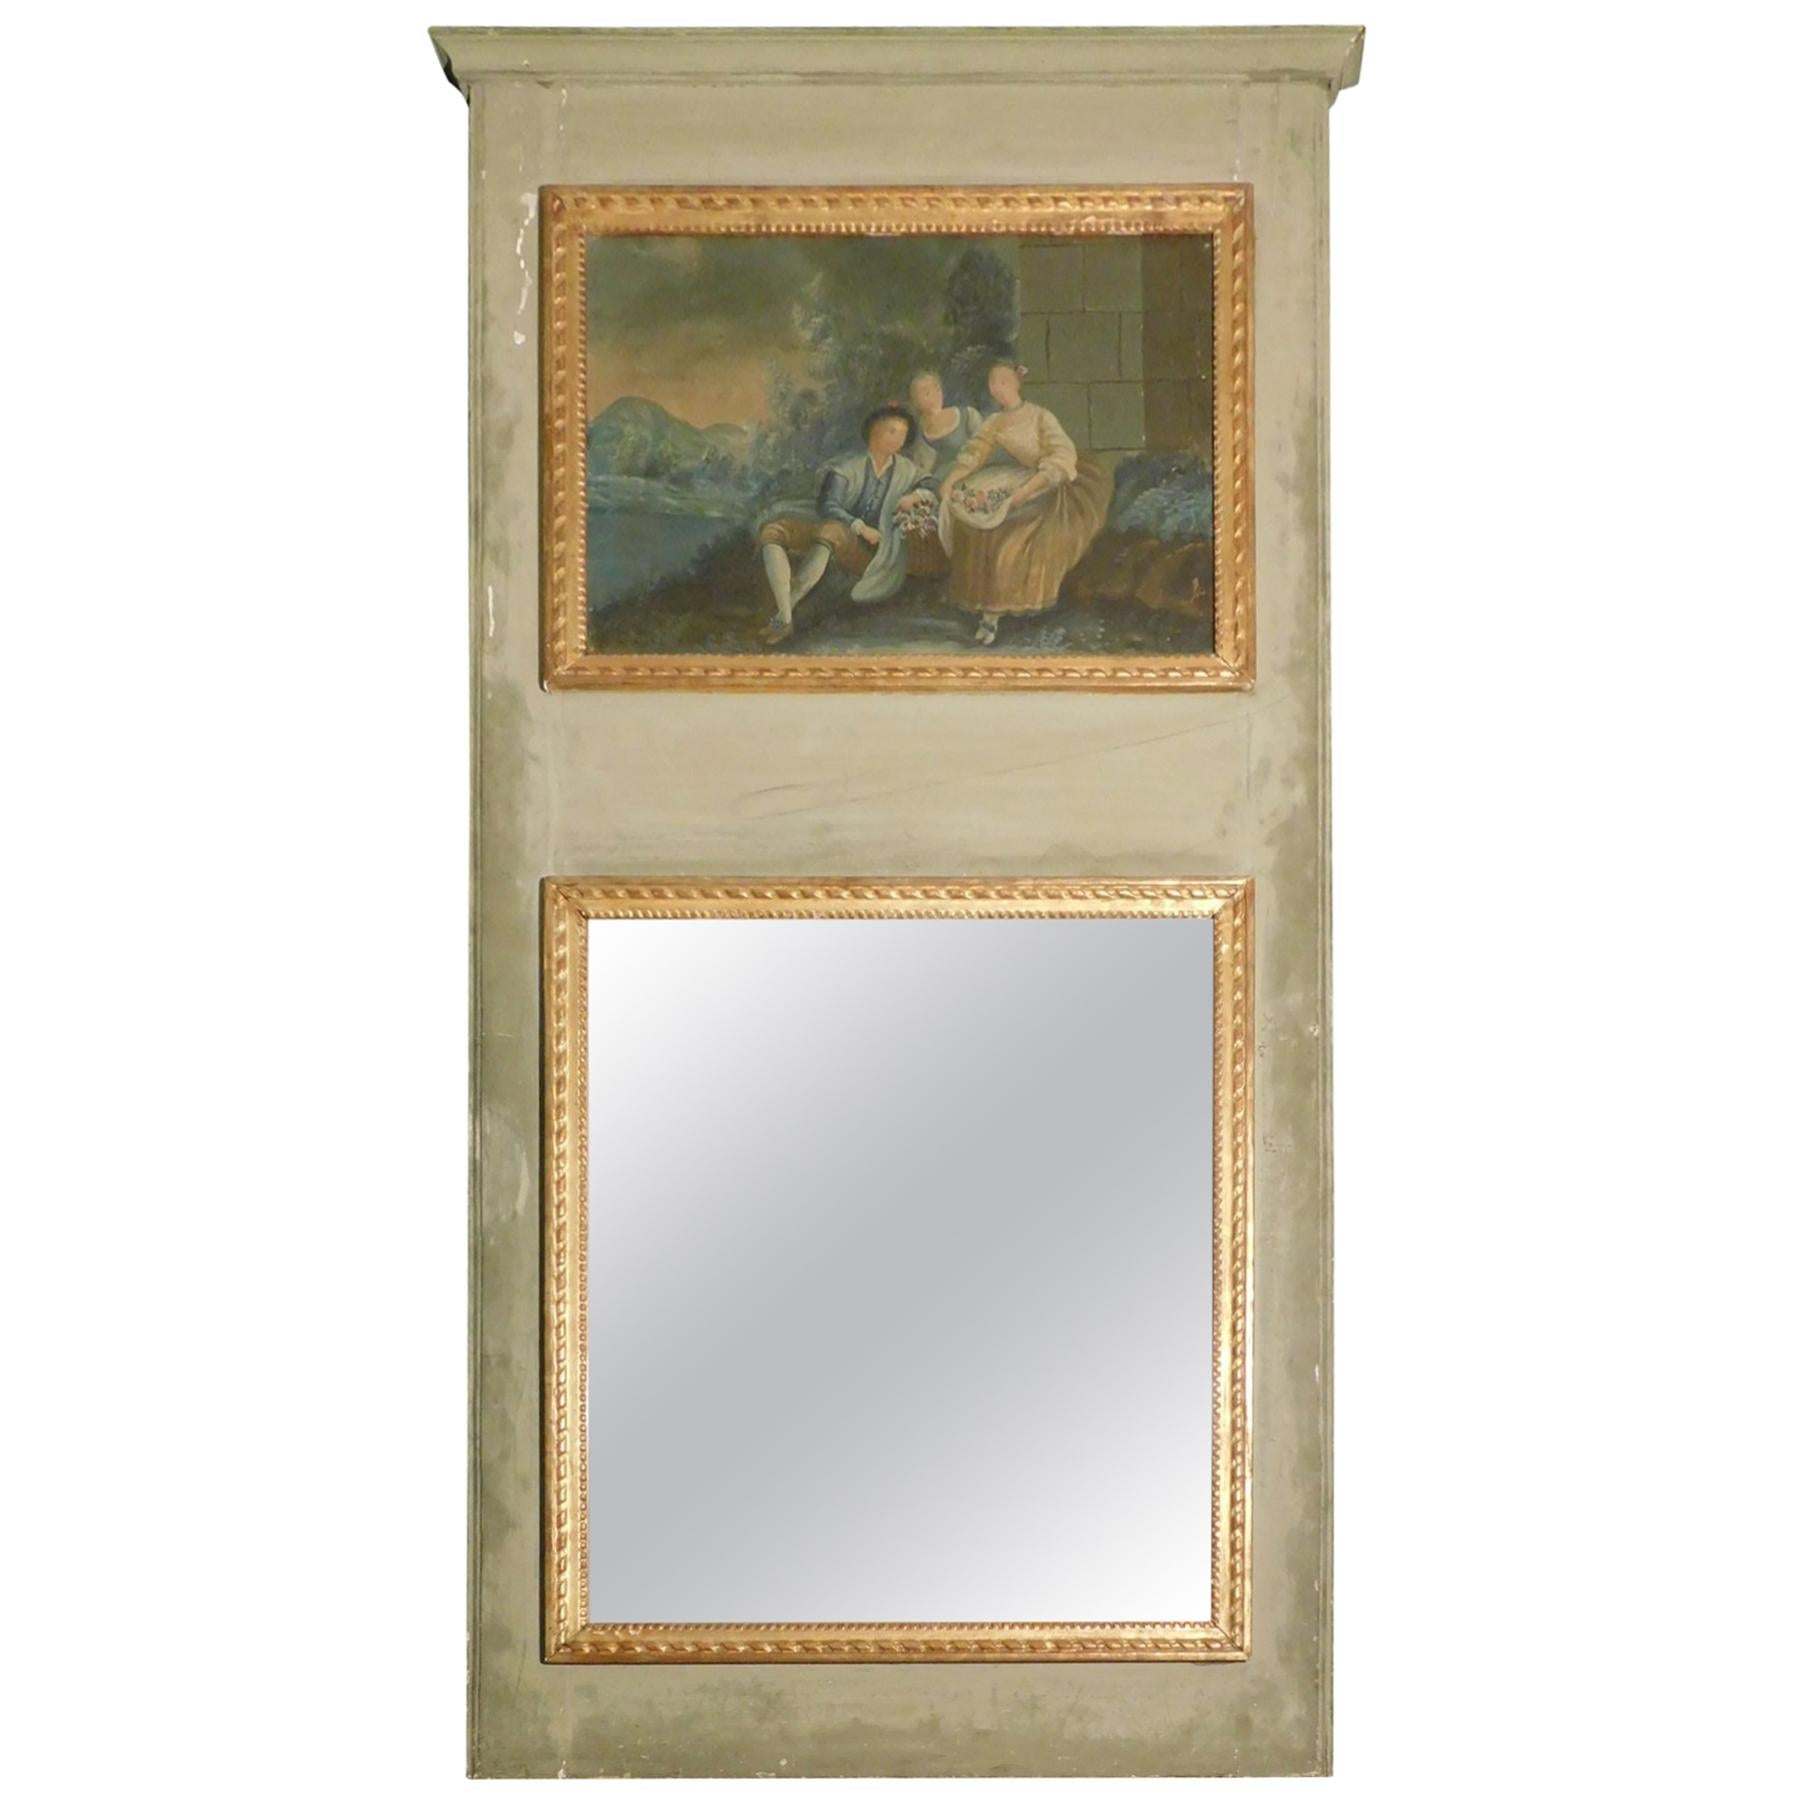 Antique Lacquered Wood Mirror with Painting, Goldened, Early 1800s, Italy